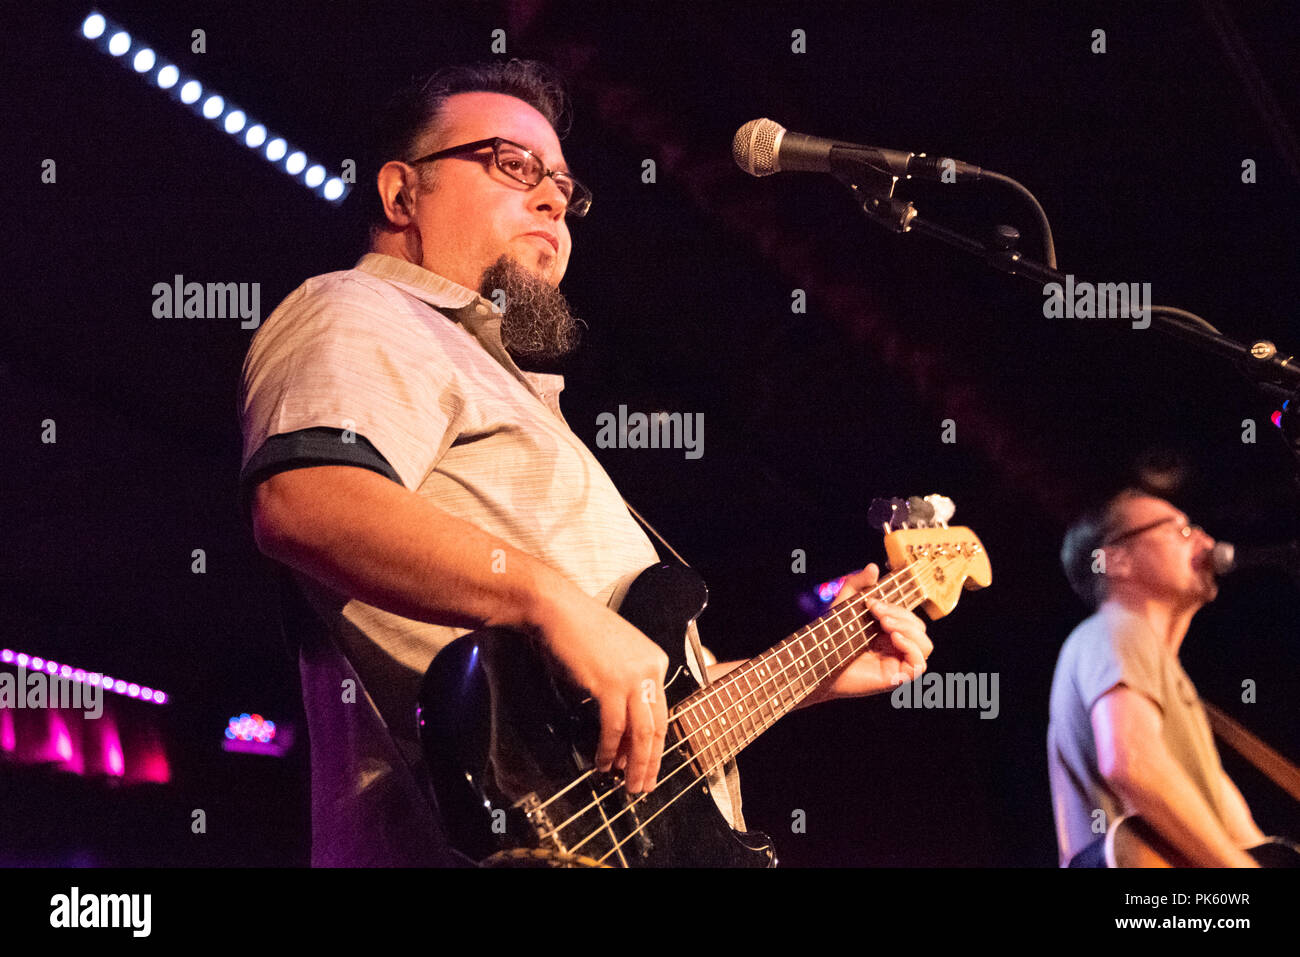 Miguel DeJesus (bassist) and Michael Johnston (lead singer) of Smalltown Poets performing live at the City Winery in Atlanta, Georgia. (USA) Stock Photo